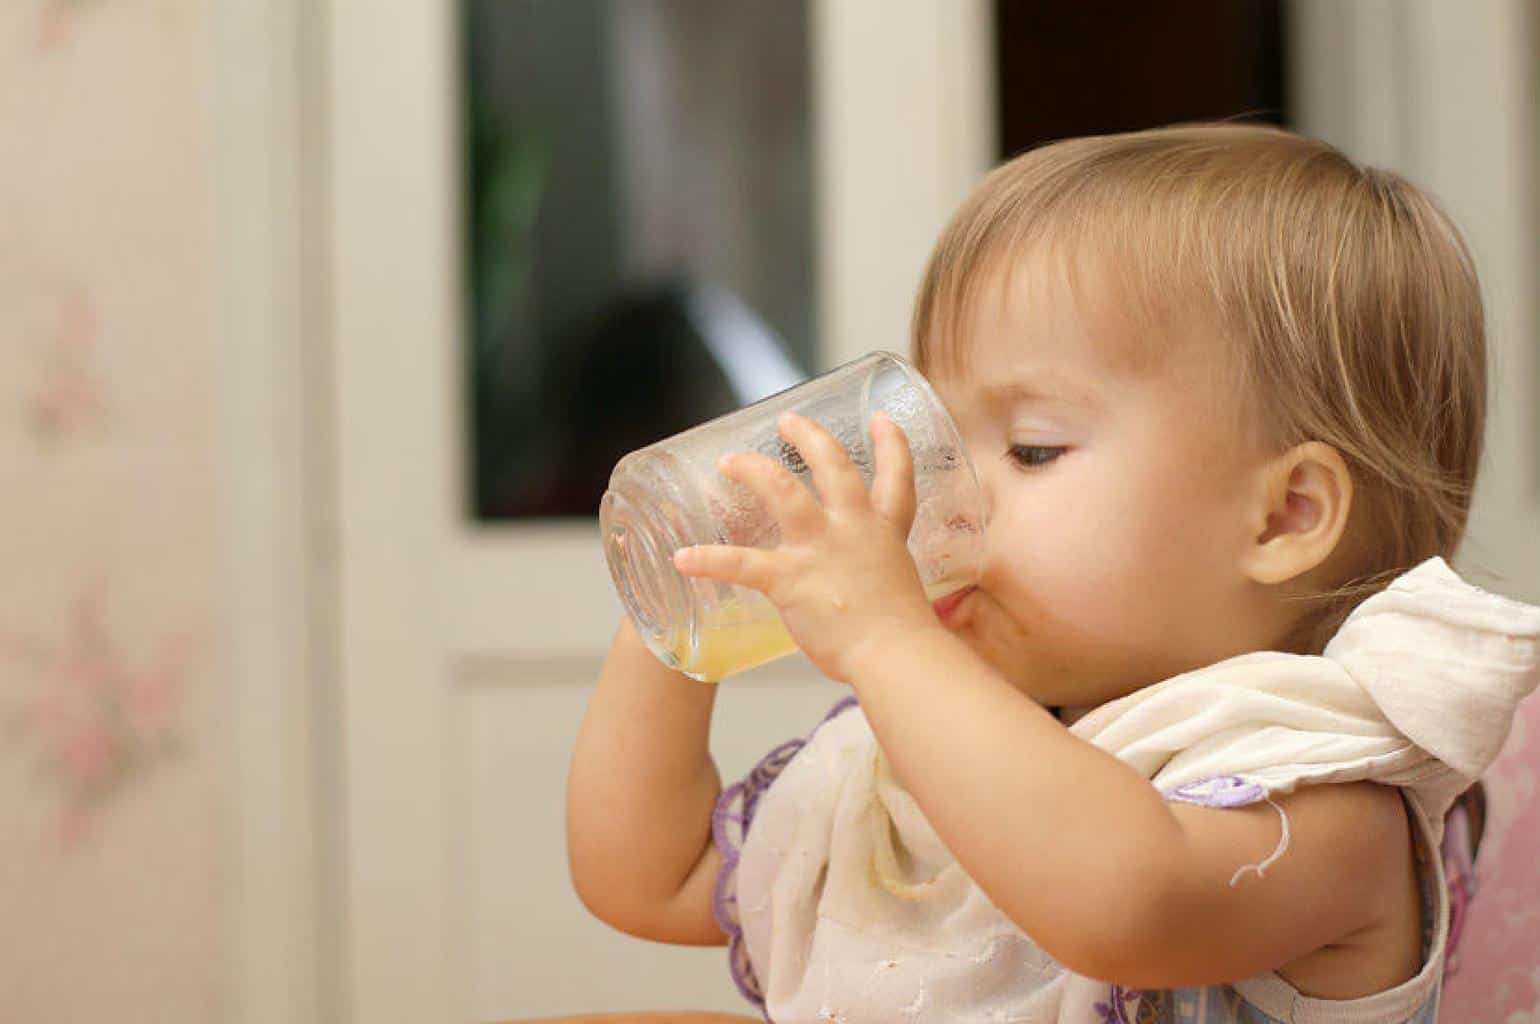 Drinking out a cup (and not a bottle) prevents your little one from exposing his/her teeth to sugar all day long.